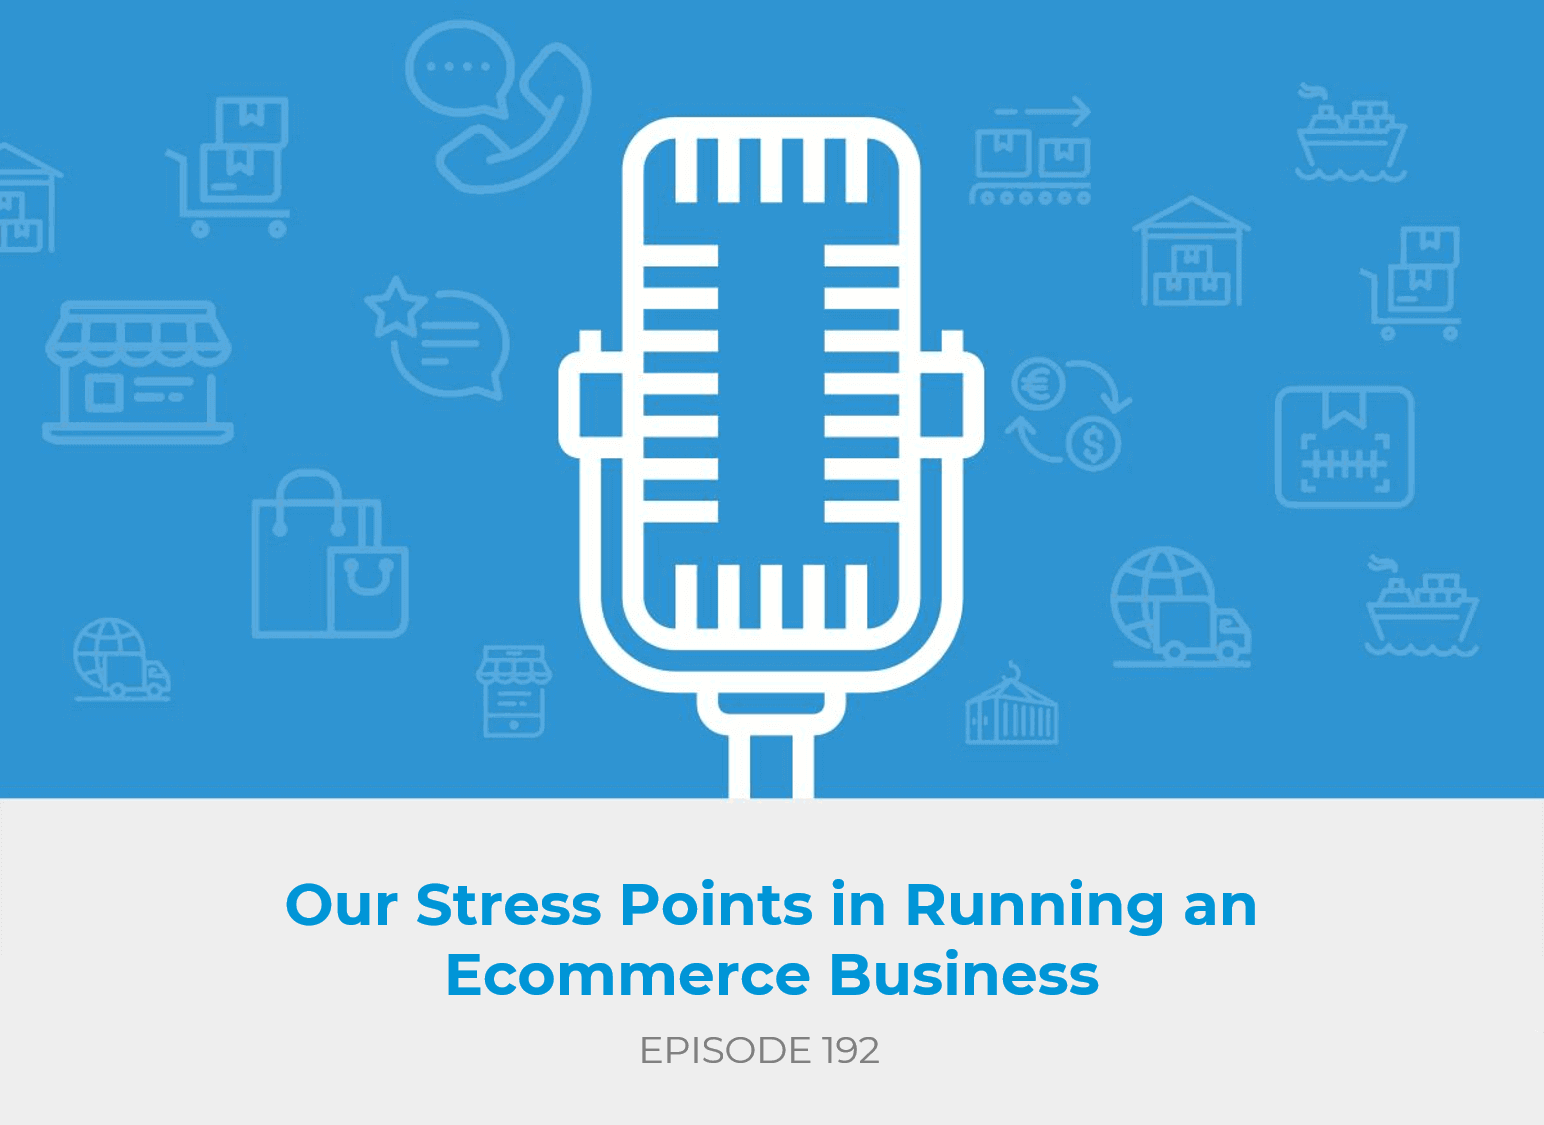 Our Stress Points in Running an Ecommerce Business